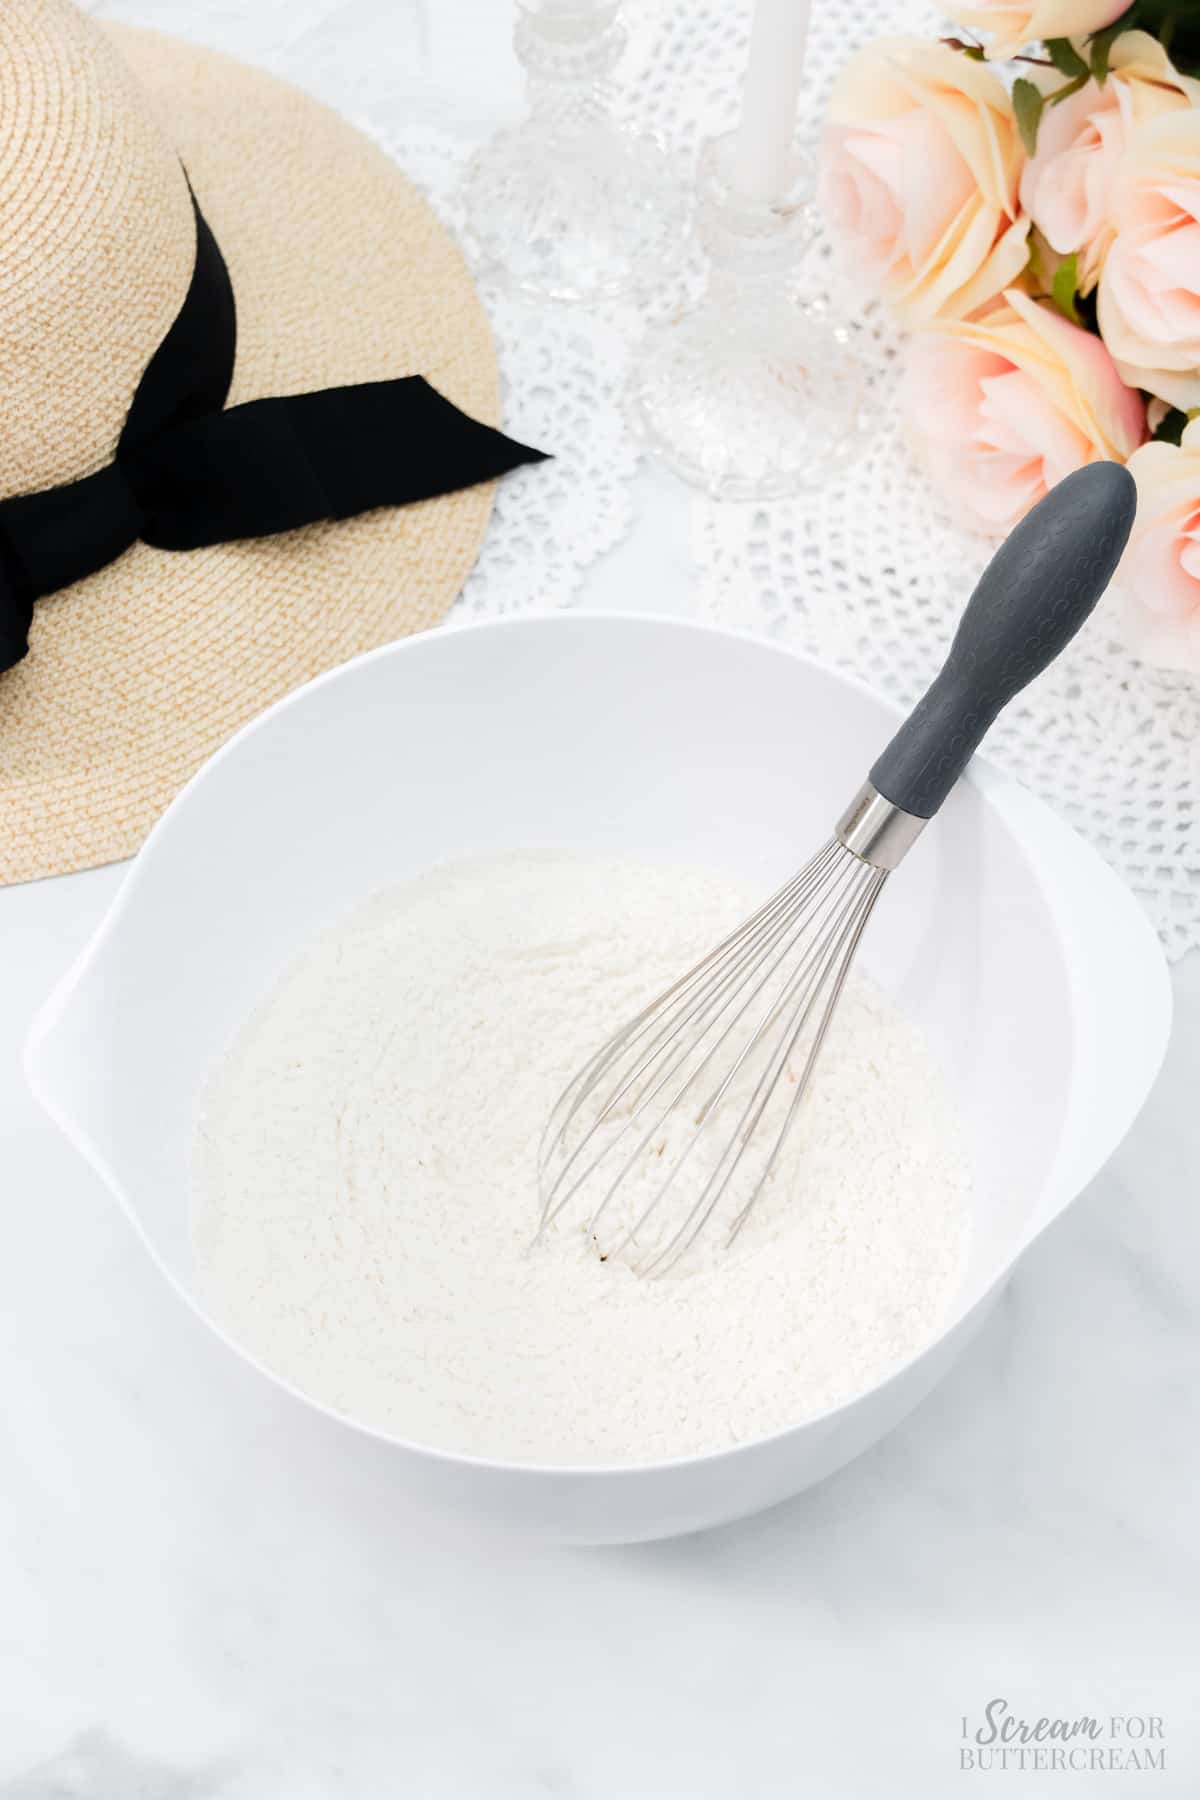 Dry cake ingredients in a white mixing bowl with a whisk.